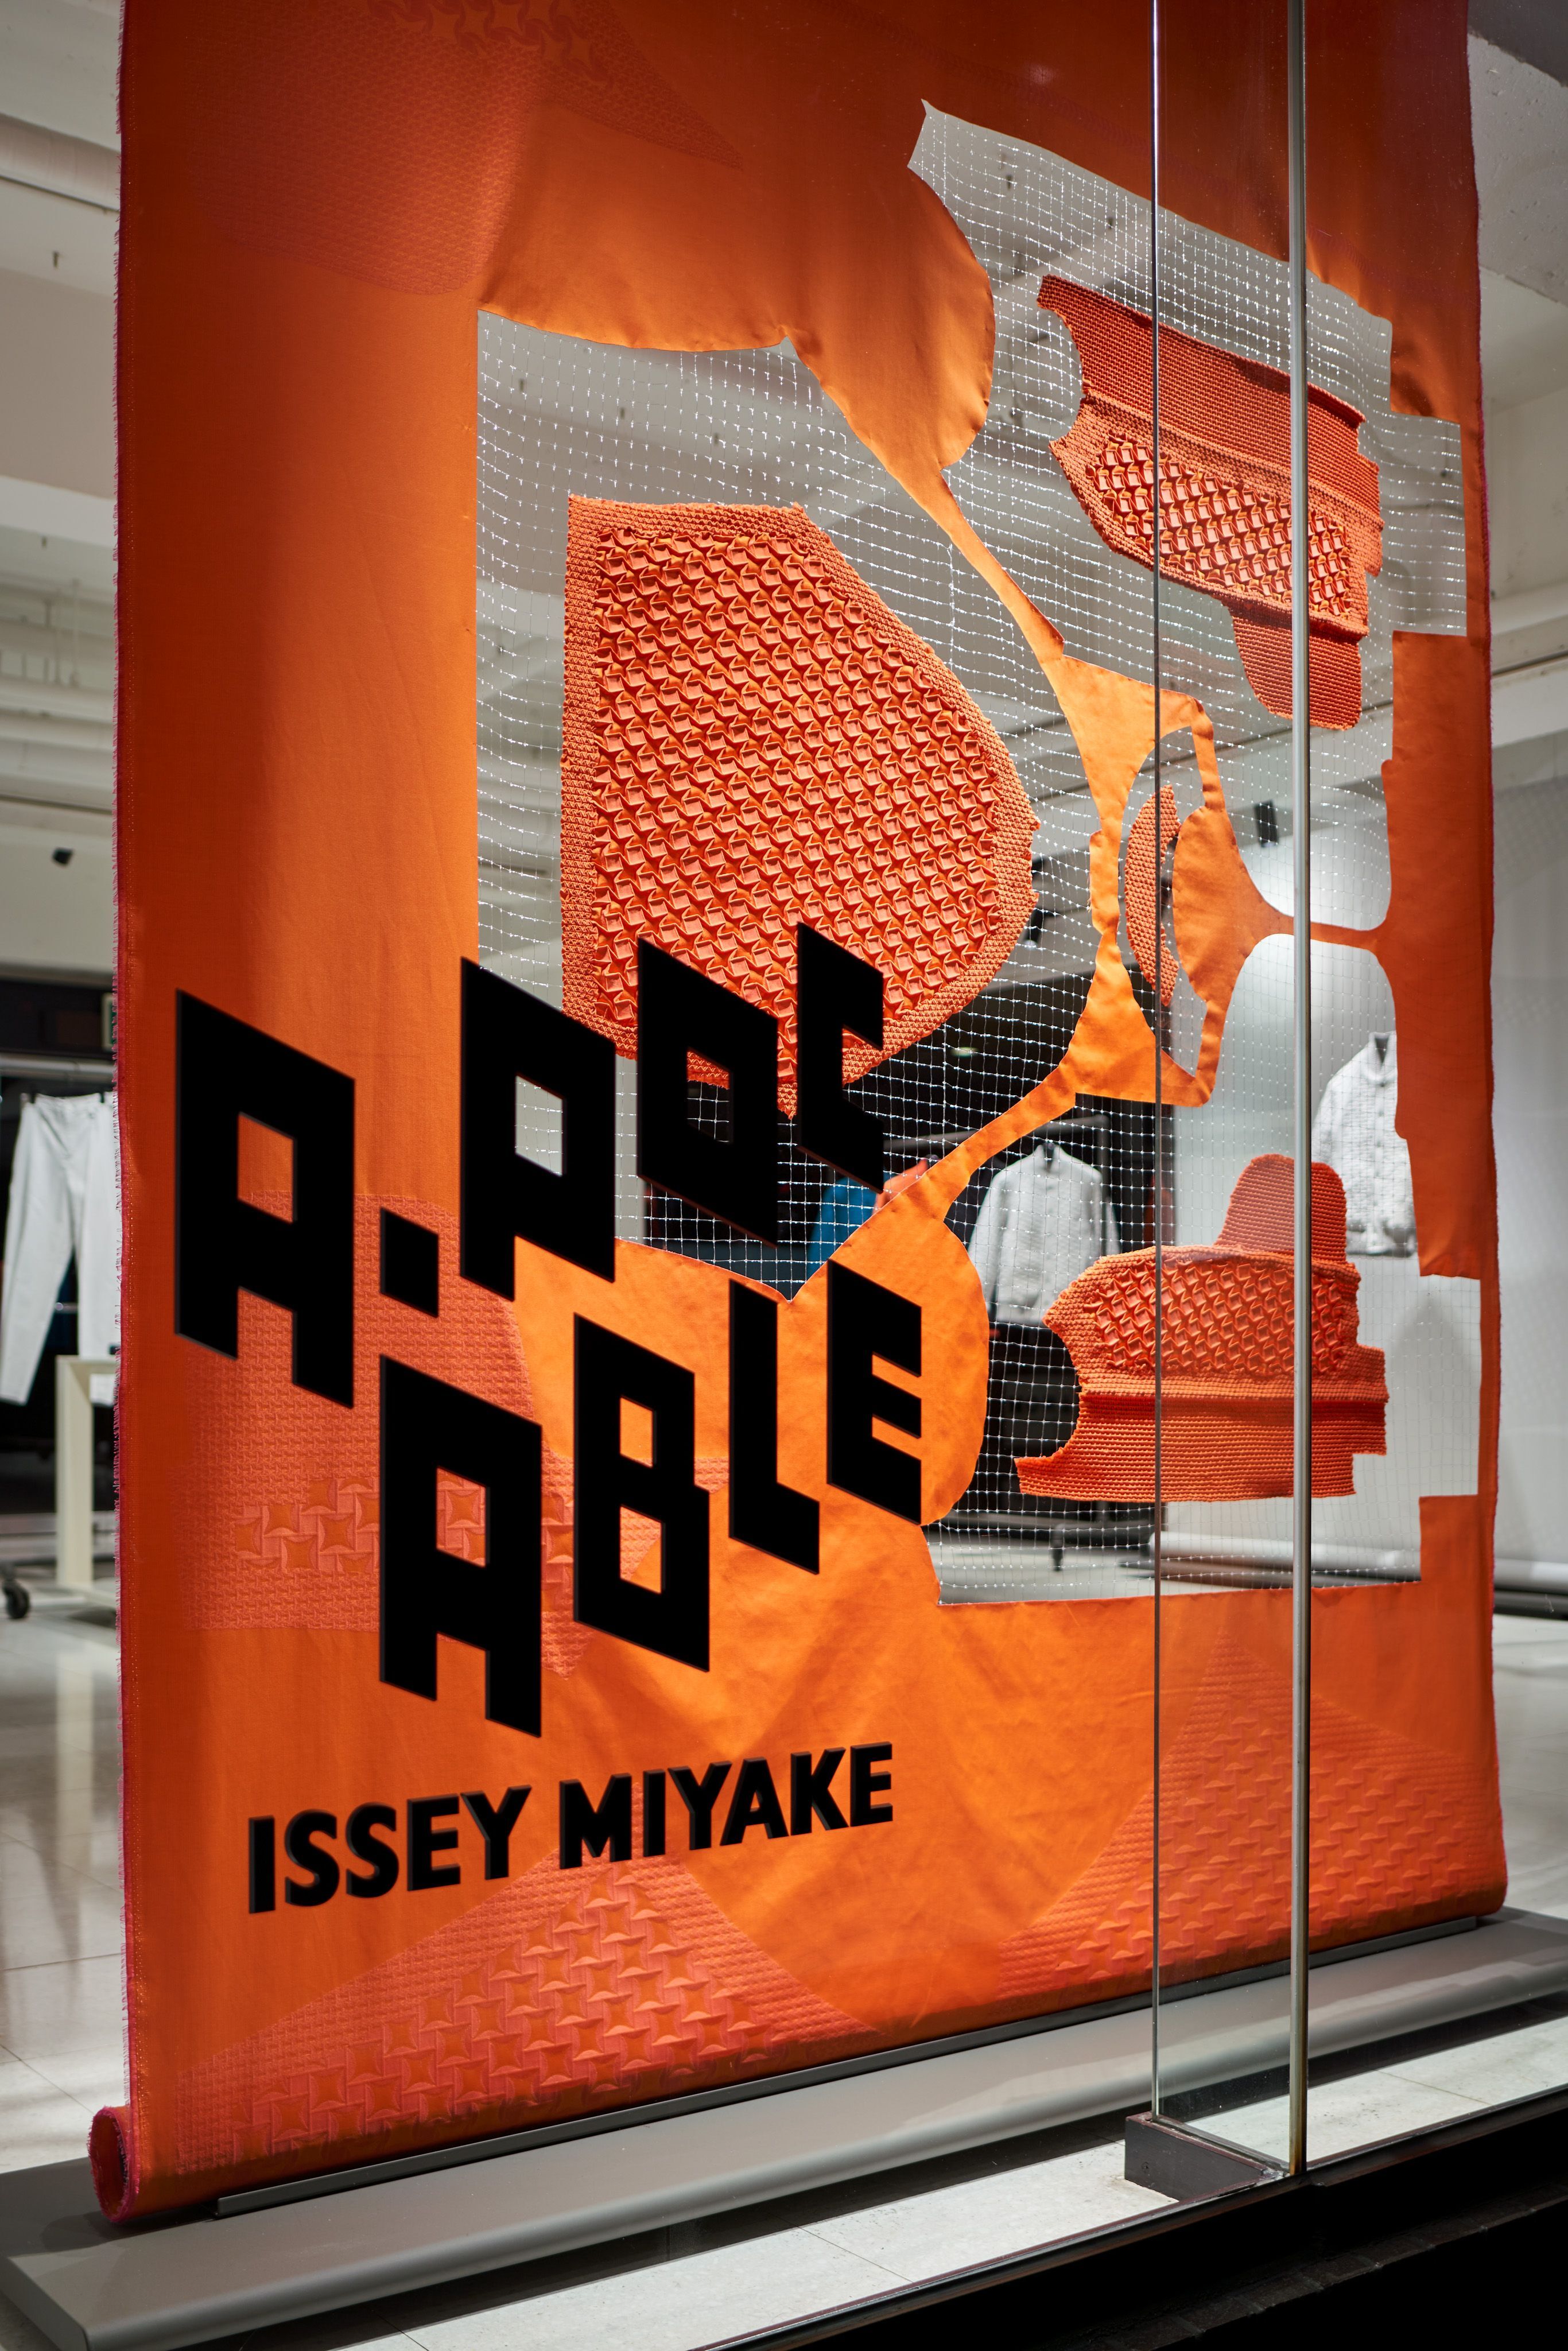 A-POC ABLE ISSEY MIYAKE-